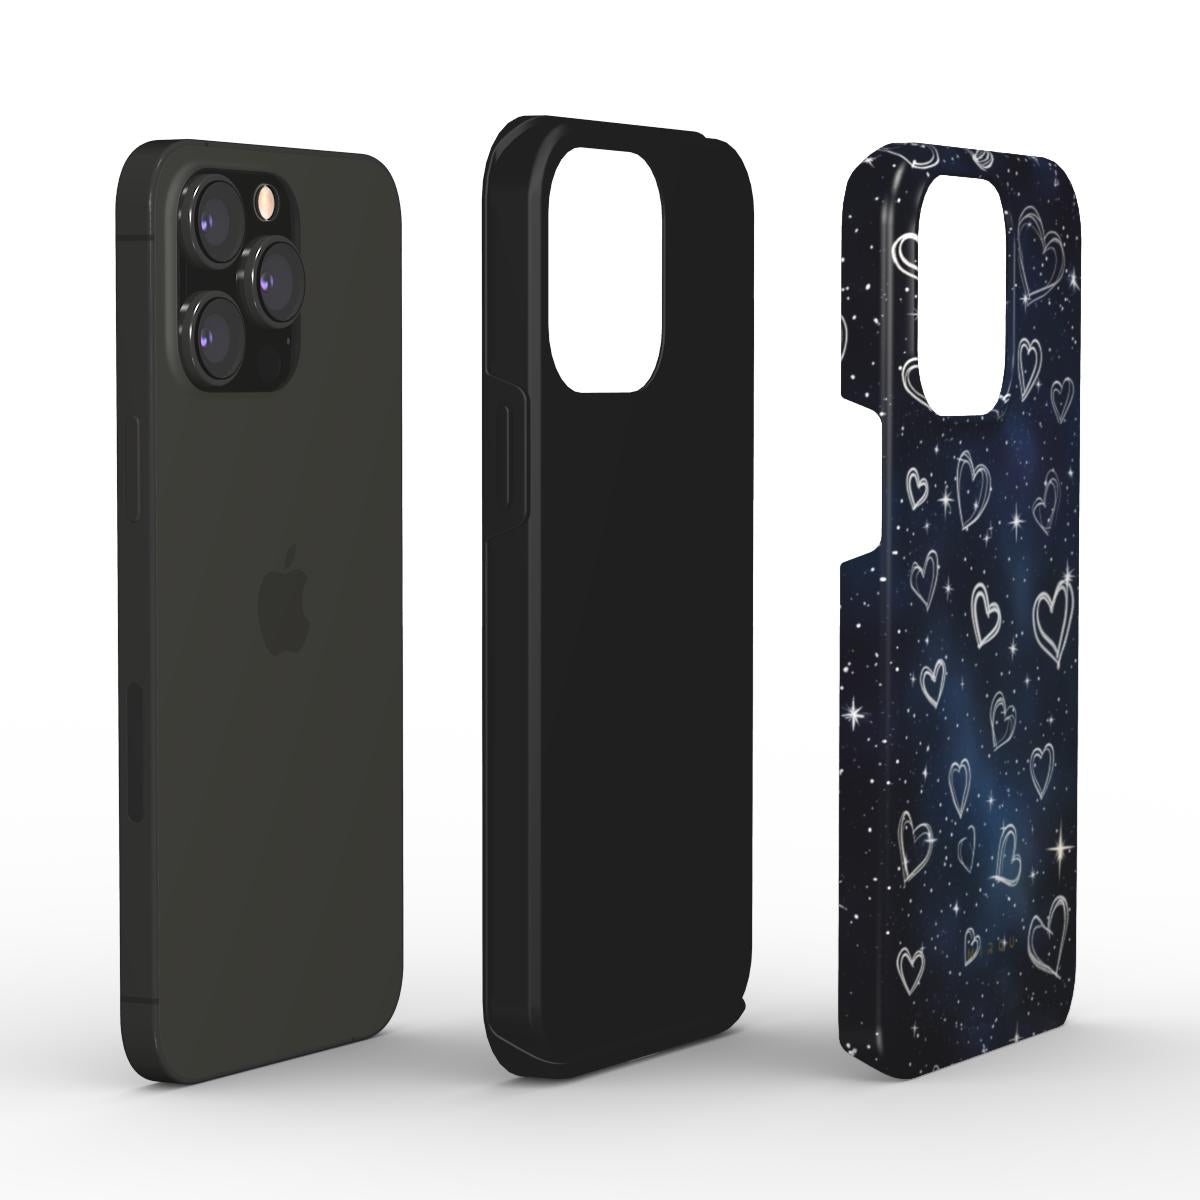 Starry Heart Field - MagSafe Phone Case